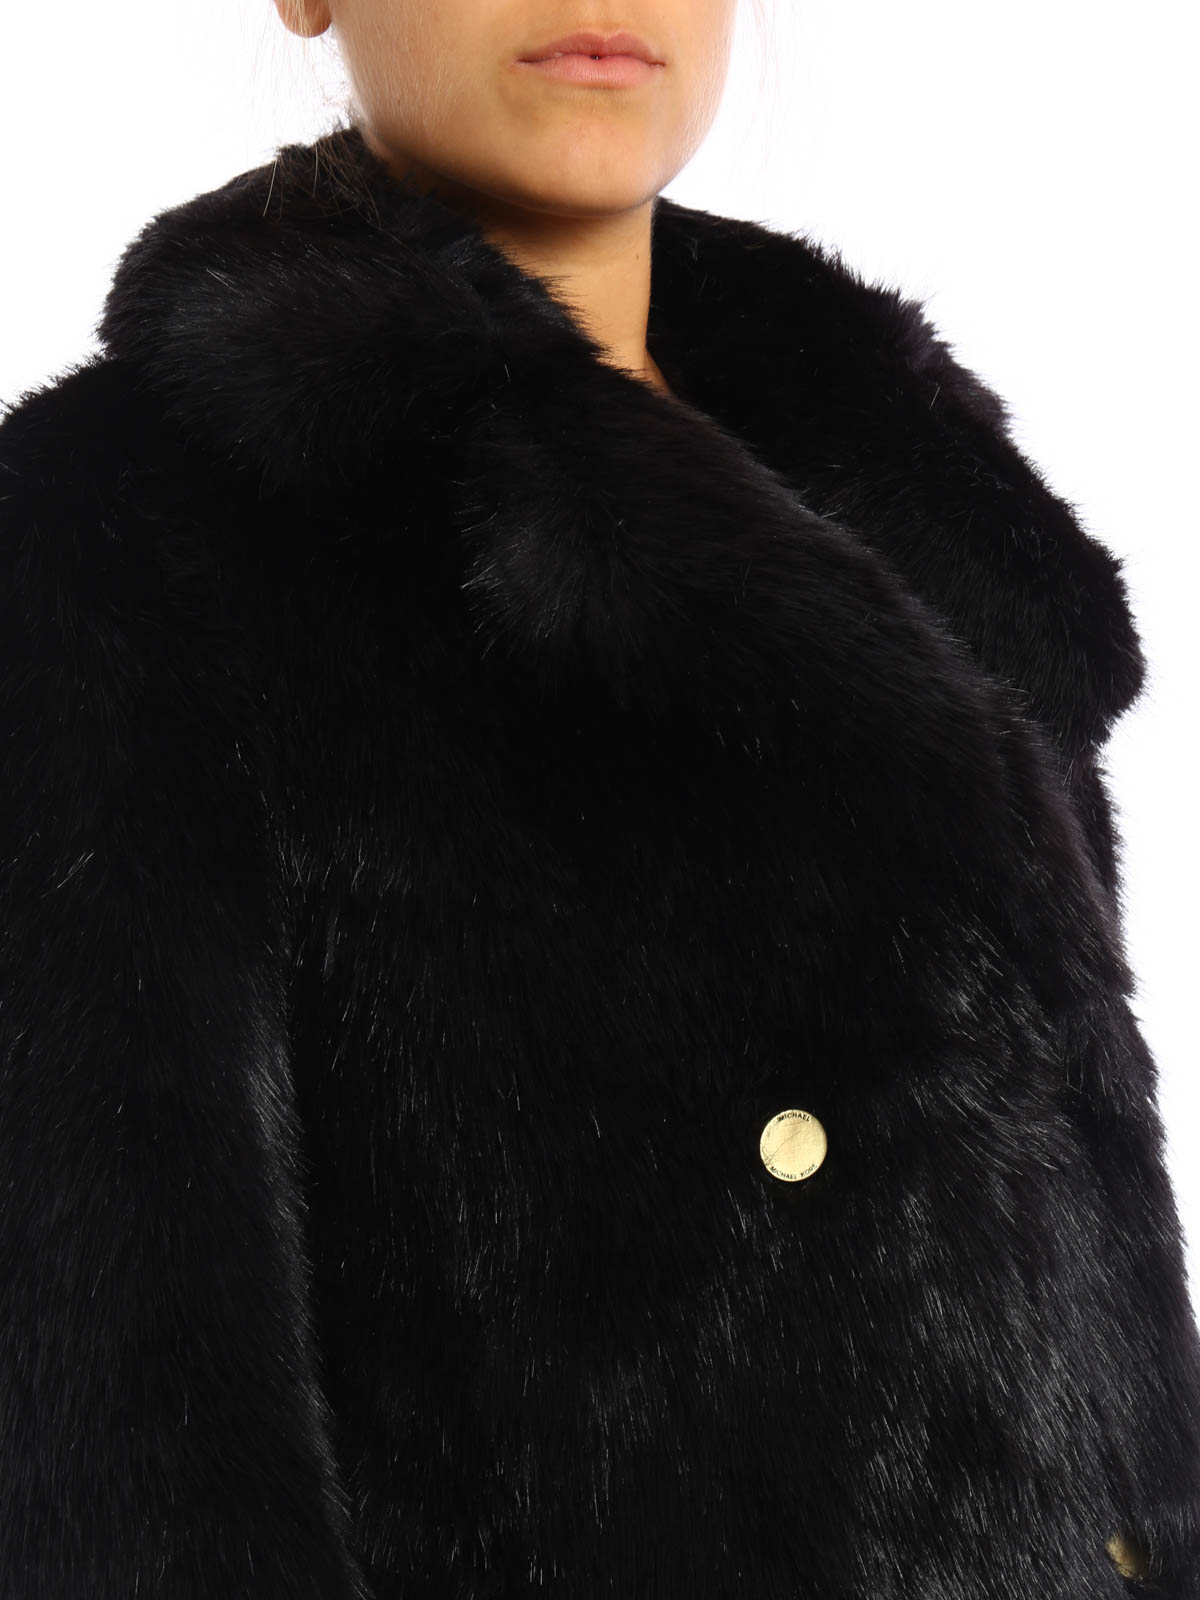 Michael Kors Plus Size FauxFur Teddy Coat  15 Chic and Comfy Coats For  Curvy Figures  Starting at Just 85  POPSUGAR Fashion Photo 8